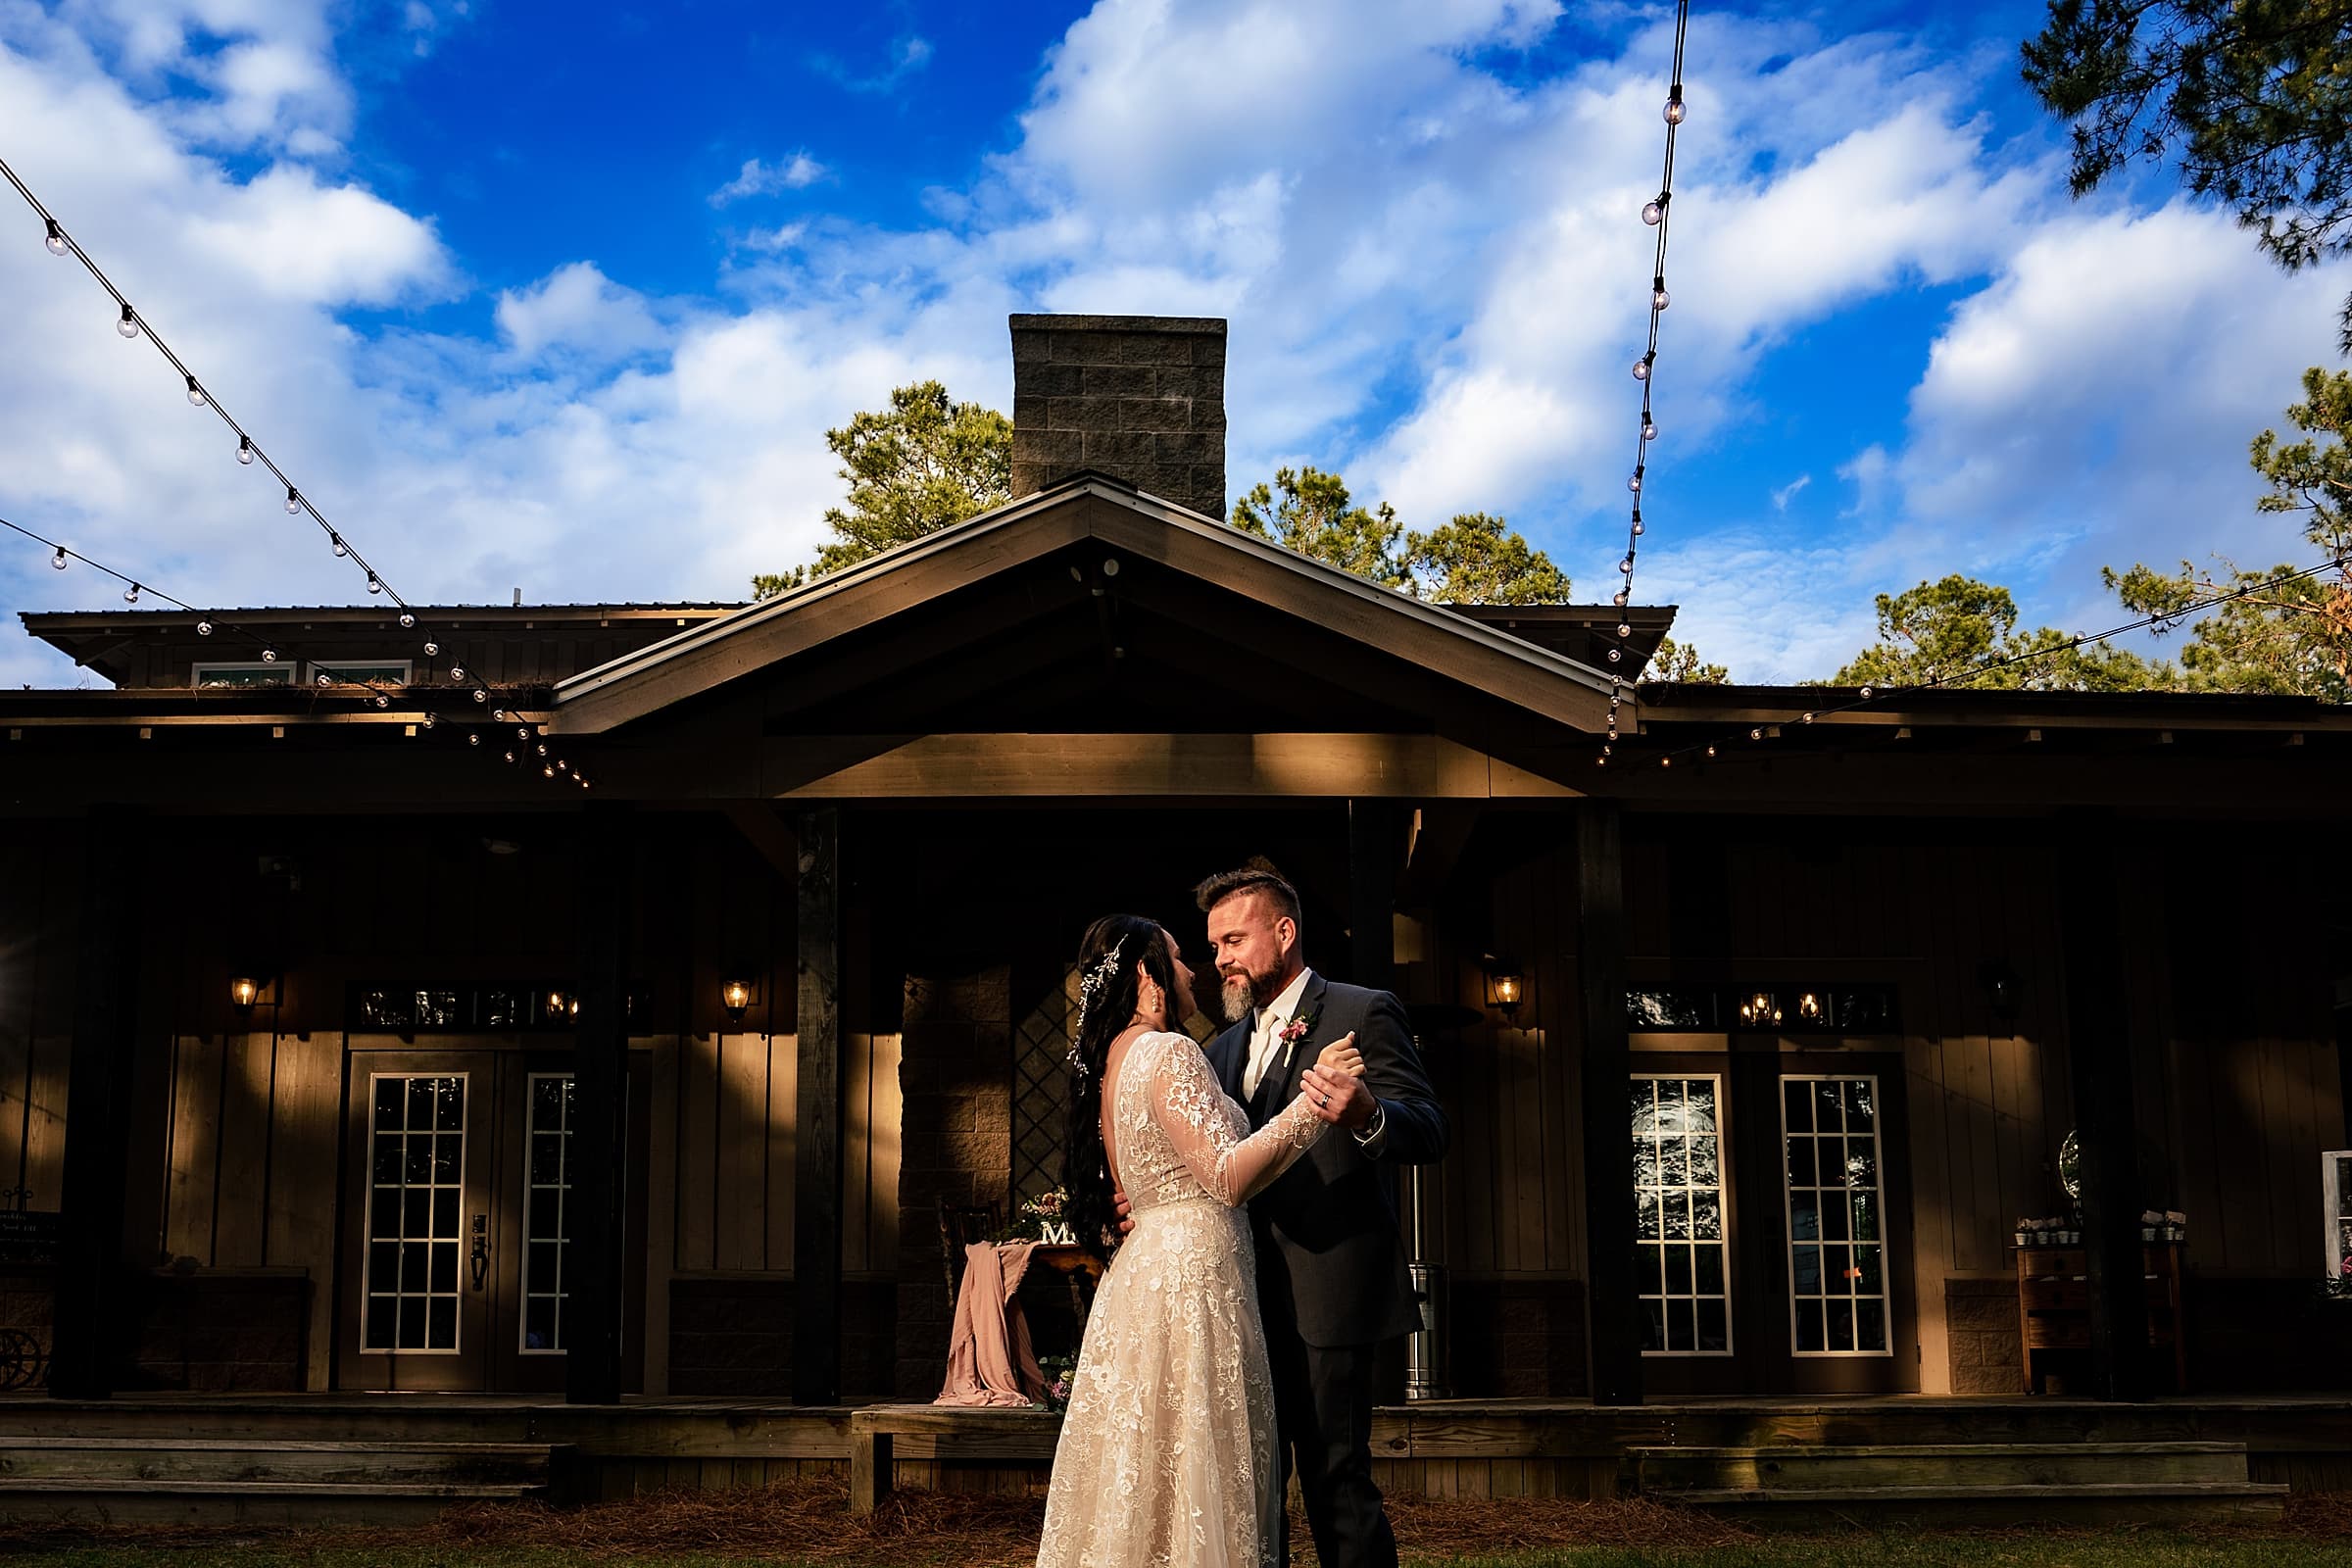 First dance under the open skies at this North Carolina wedding